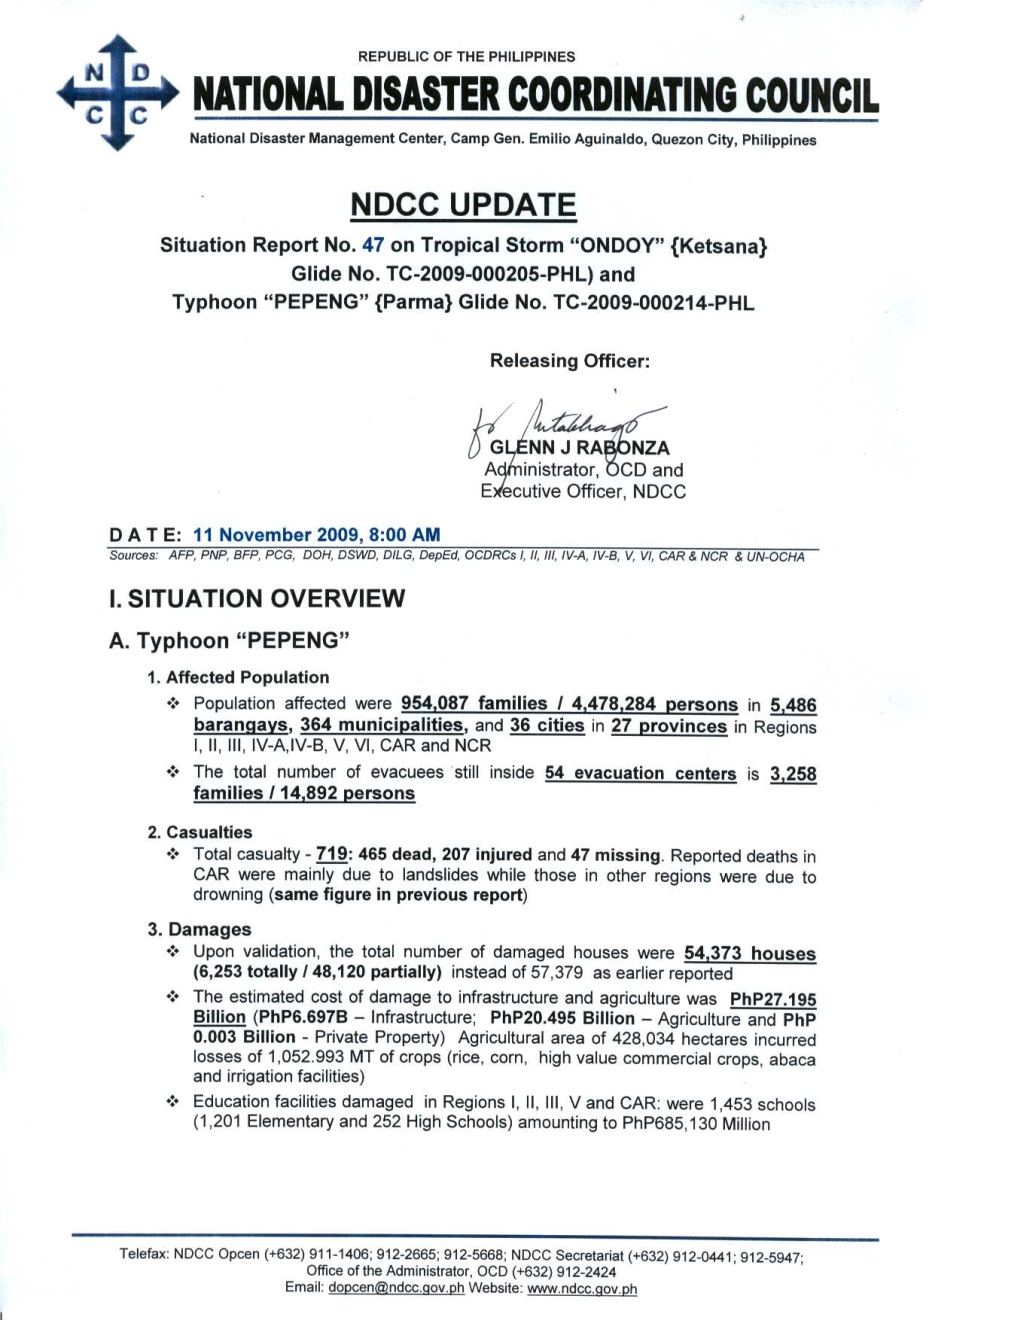 NDCC Update Sitrep No. 47 on TS Ondoy and Typhoon Pepeng As Of